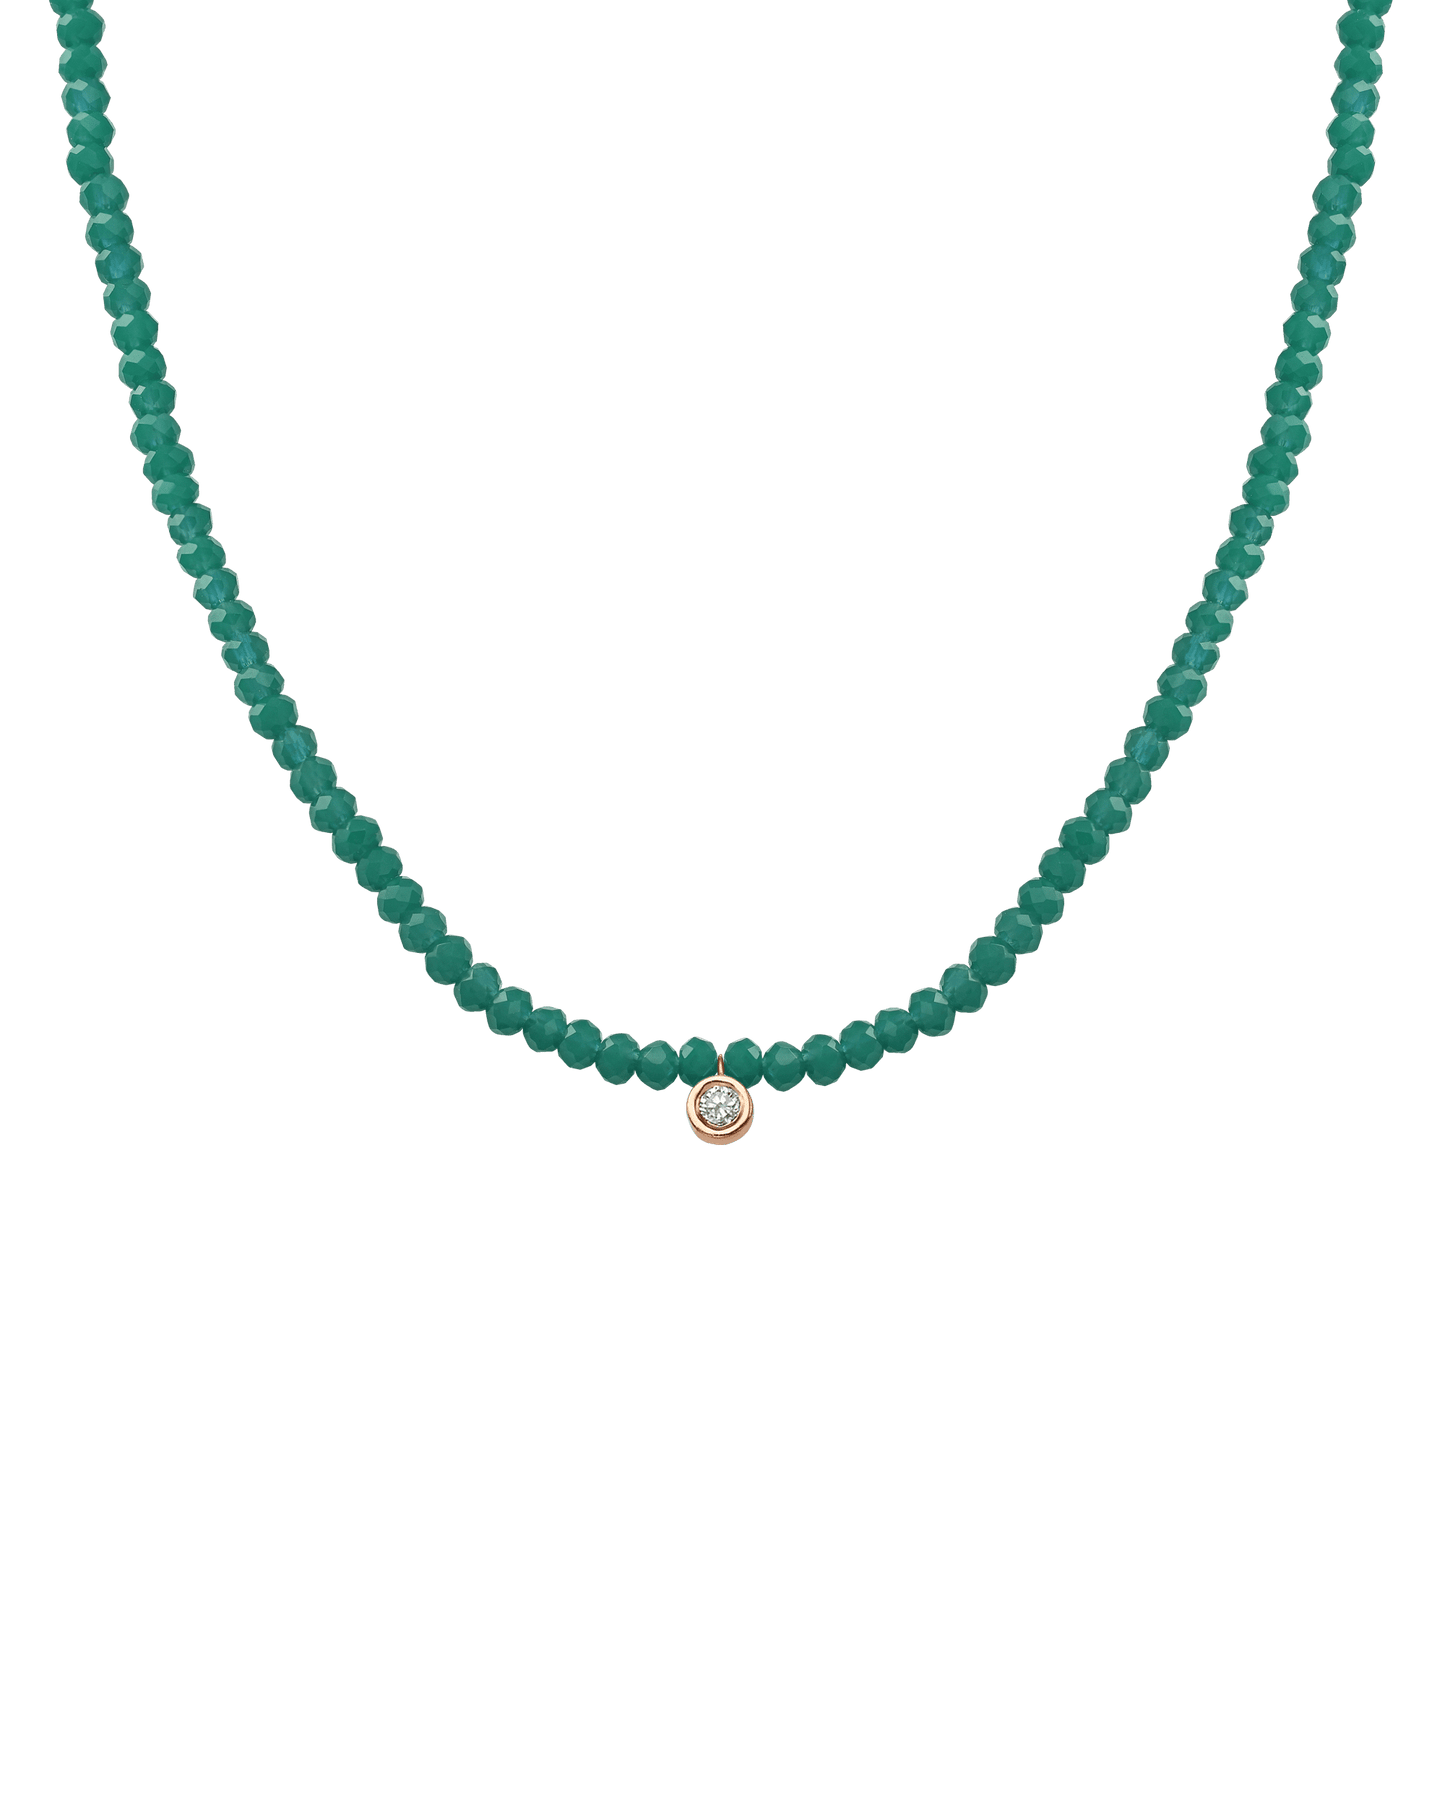 The Gemstone & Diamond Necklace - 14K Rose Gold Necklaces 14K Solid Gold Natural Emerald Medium: 0.04ct 14"